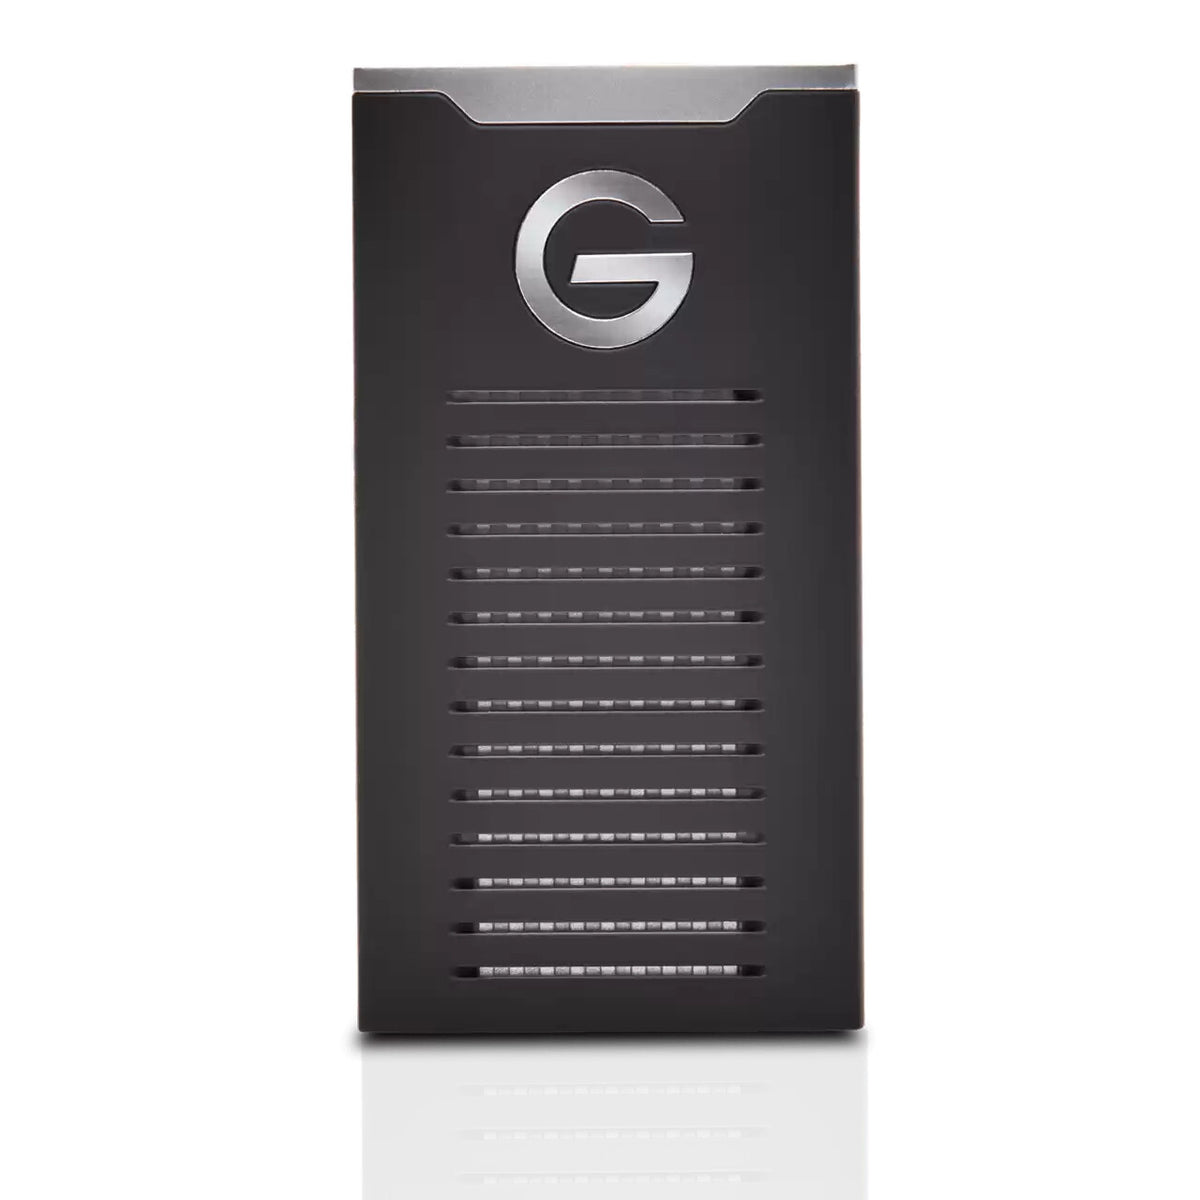 SanDisk G-DRIVE External solid state drive - 2 TB